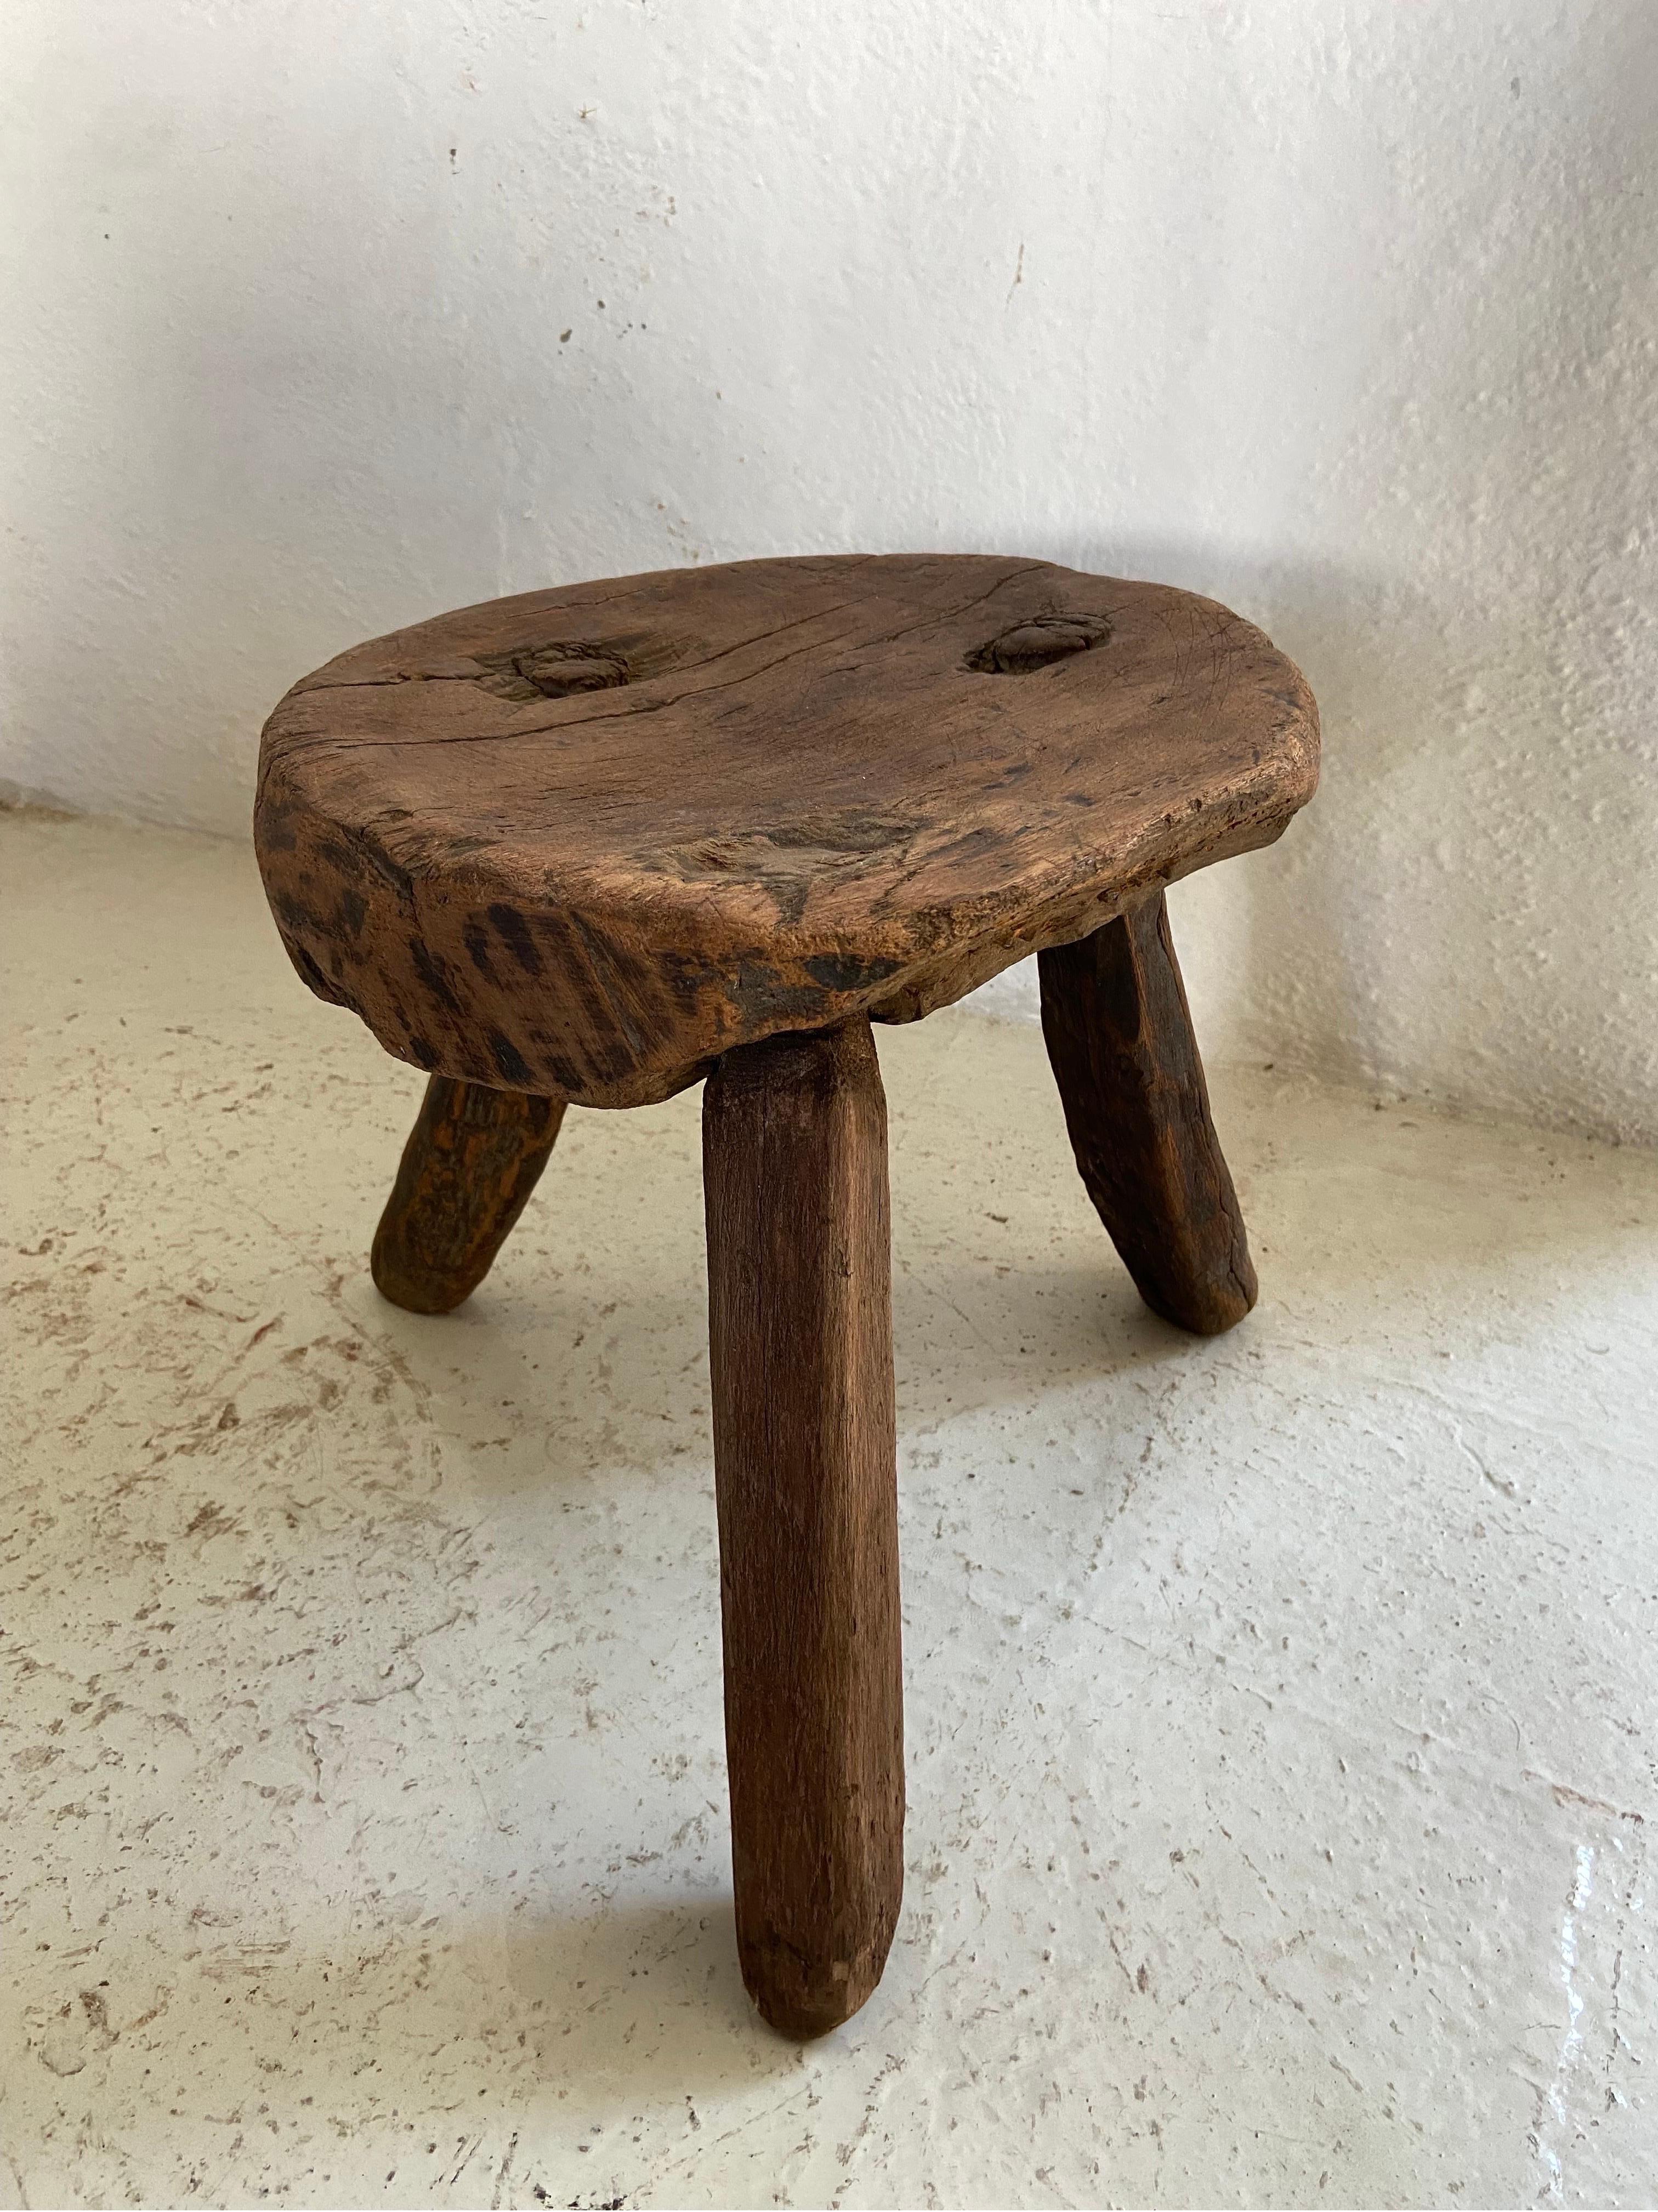 Mid 20th Century Stool From Mexico In Distressed Condition For Sale In San Miguel de Allende, Guanajuato